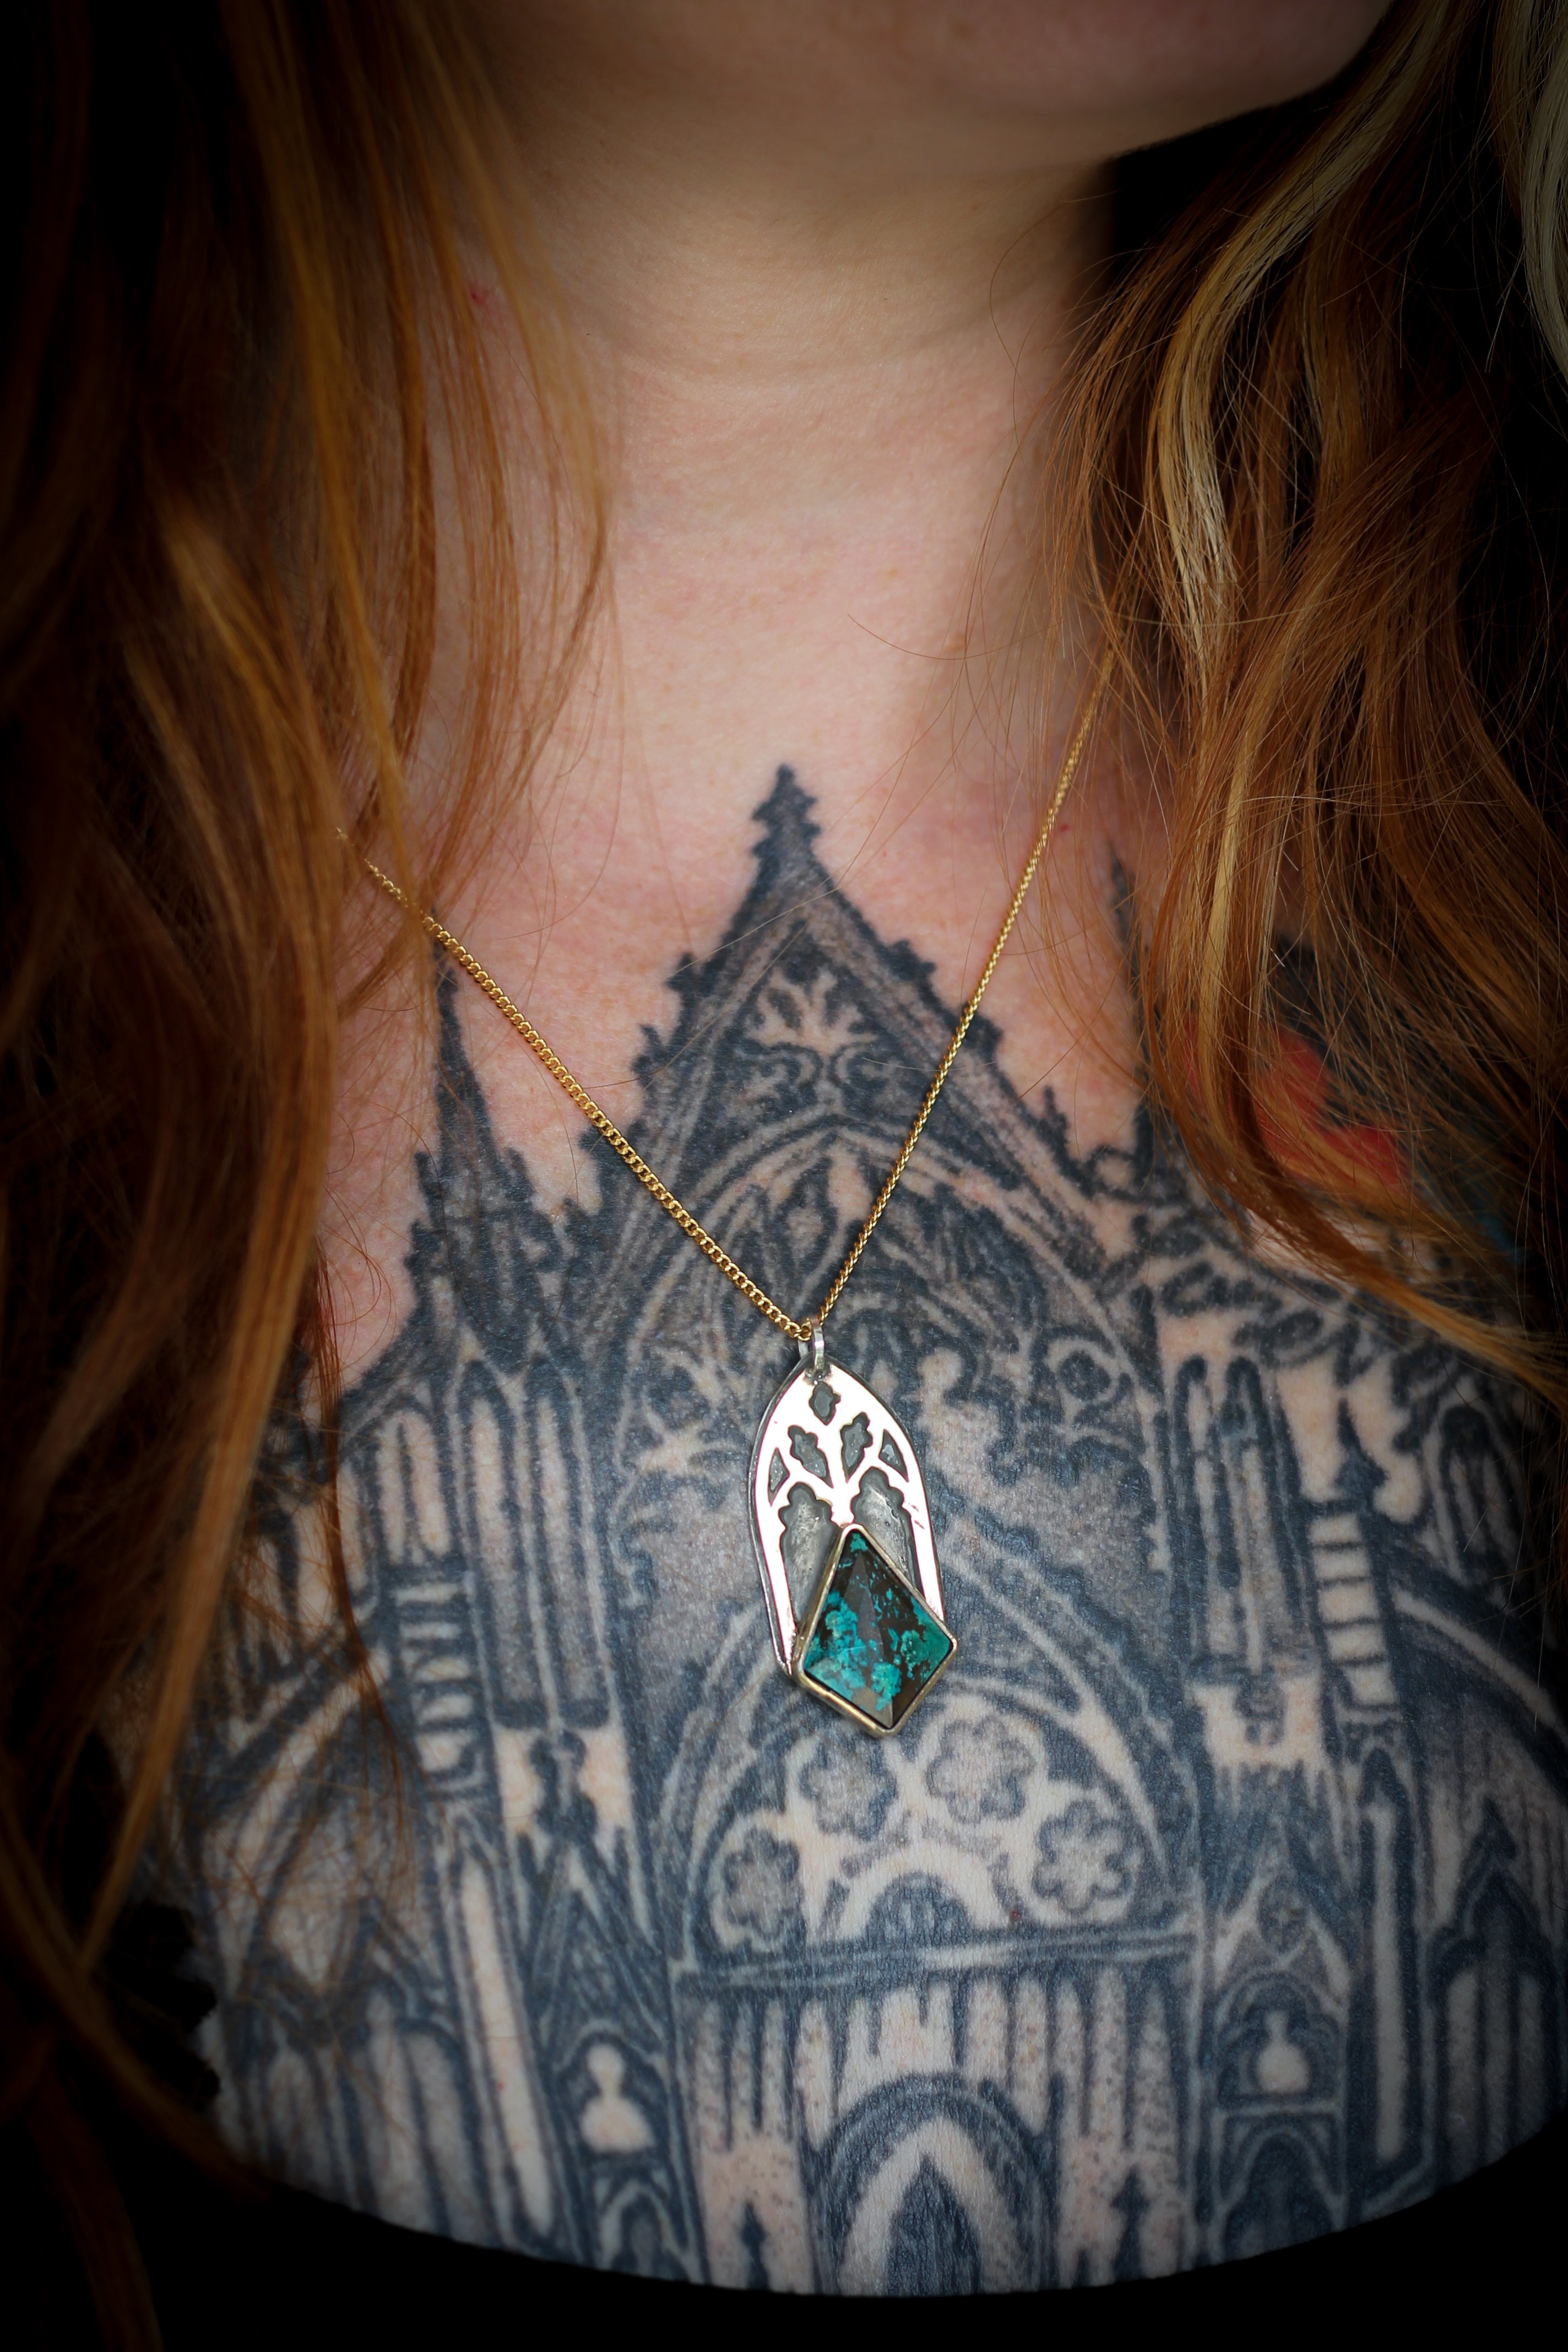 Gothica - Gothic arch necklace in Tibetan turquoise, brass and silver